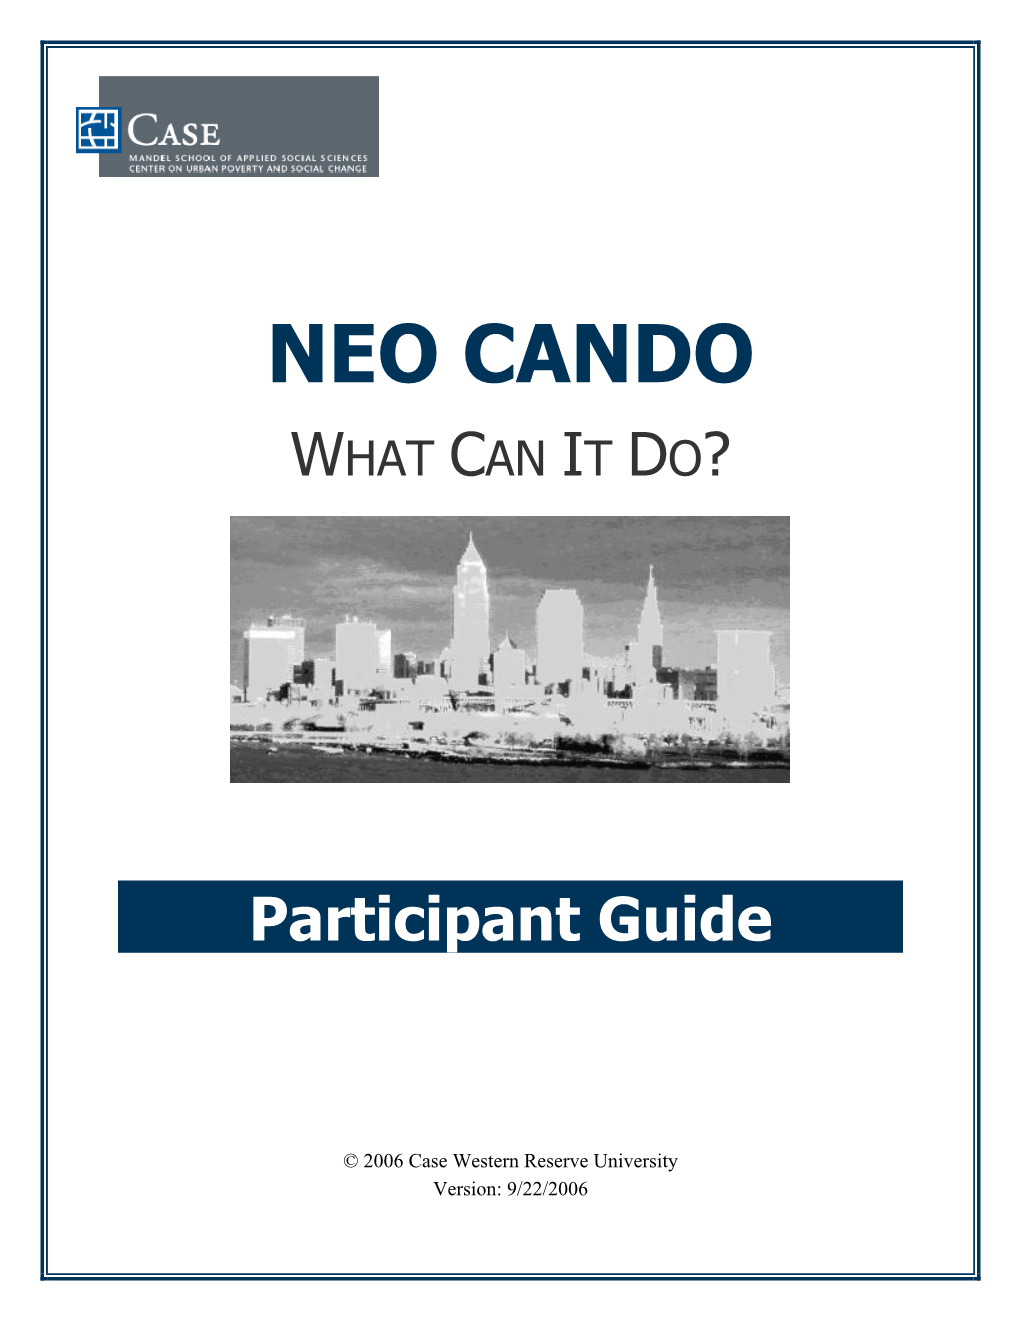 What NEO CANDO CAN DO 15 Min